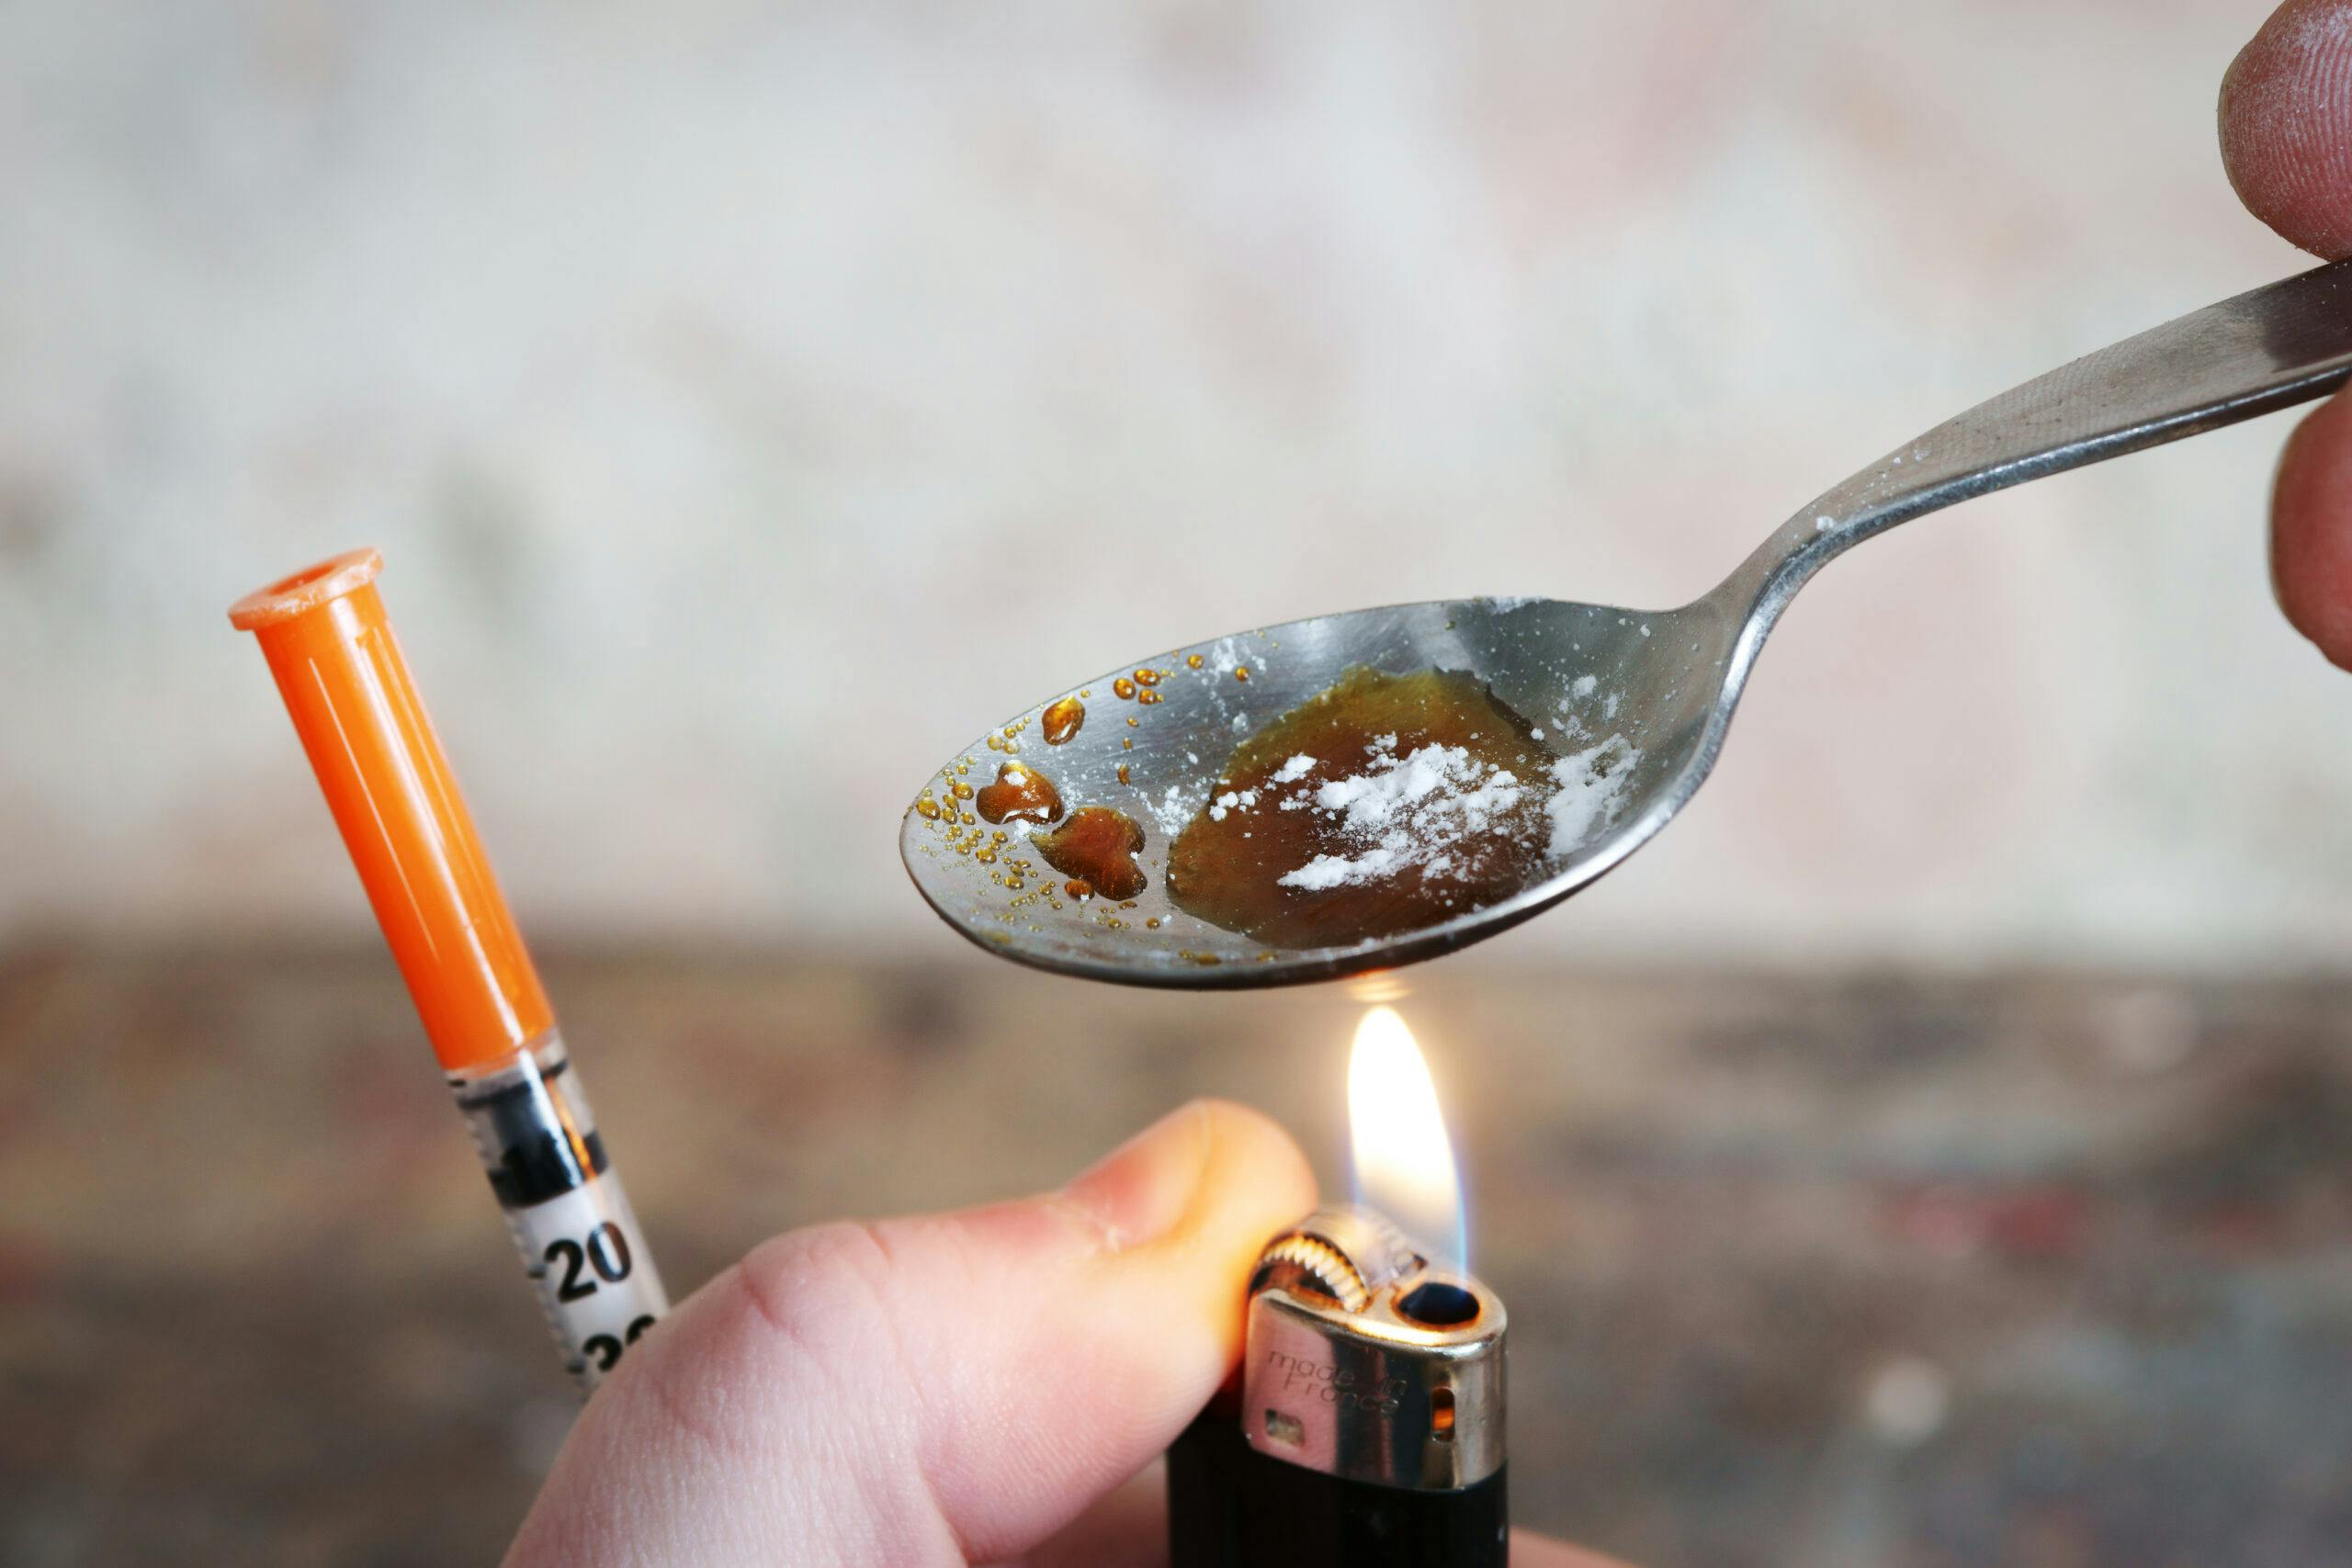 addict cooking heroin and cocaine needle spoon